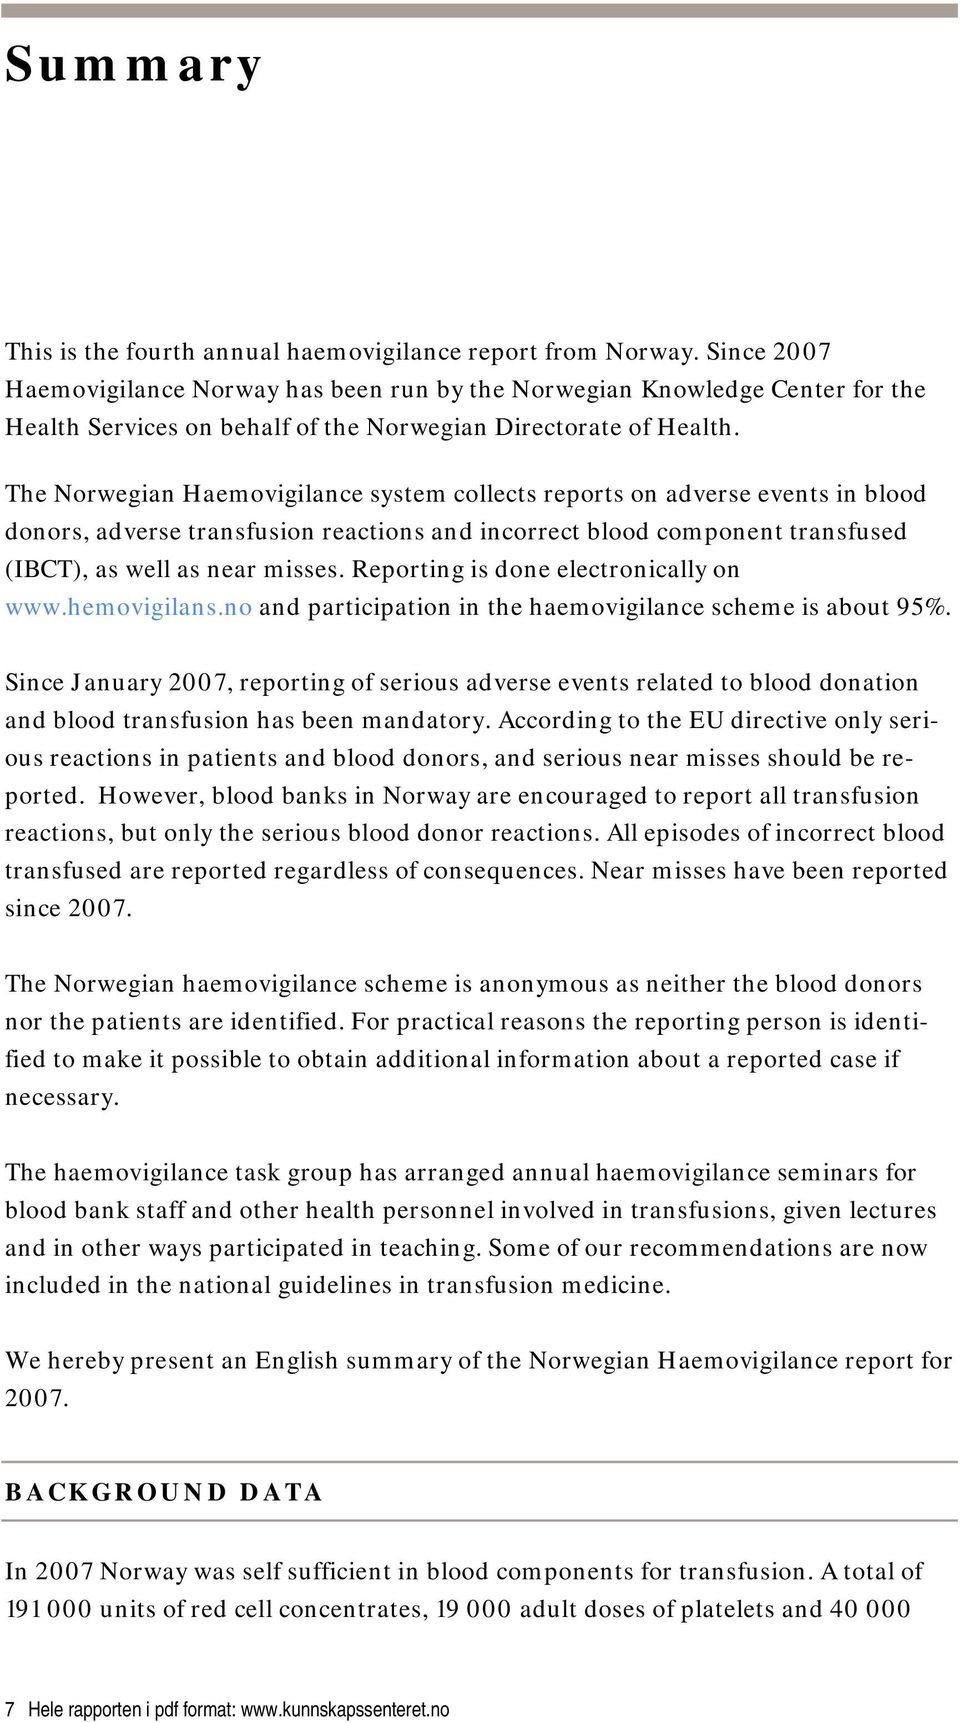 The Norwegian Haemovigilance system collects reports on adverse events in blood donors, adverse transfusion reactions and incorrect blood component transfused (IBCT), as well as near misses.